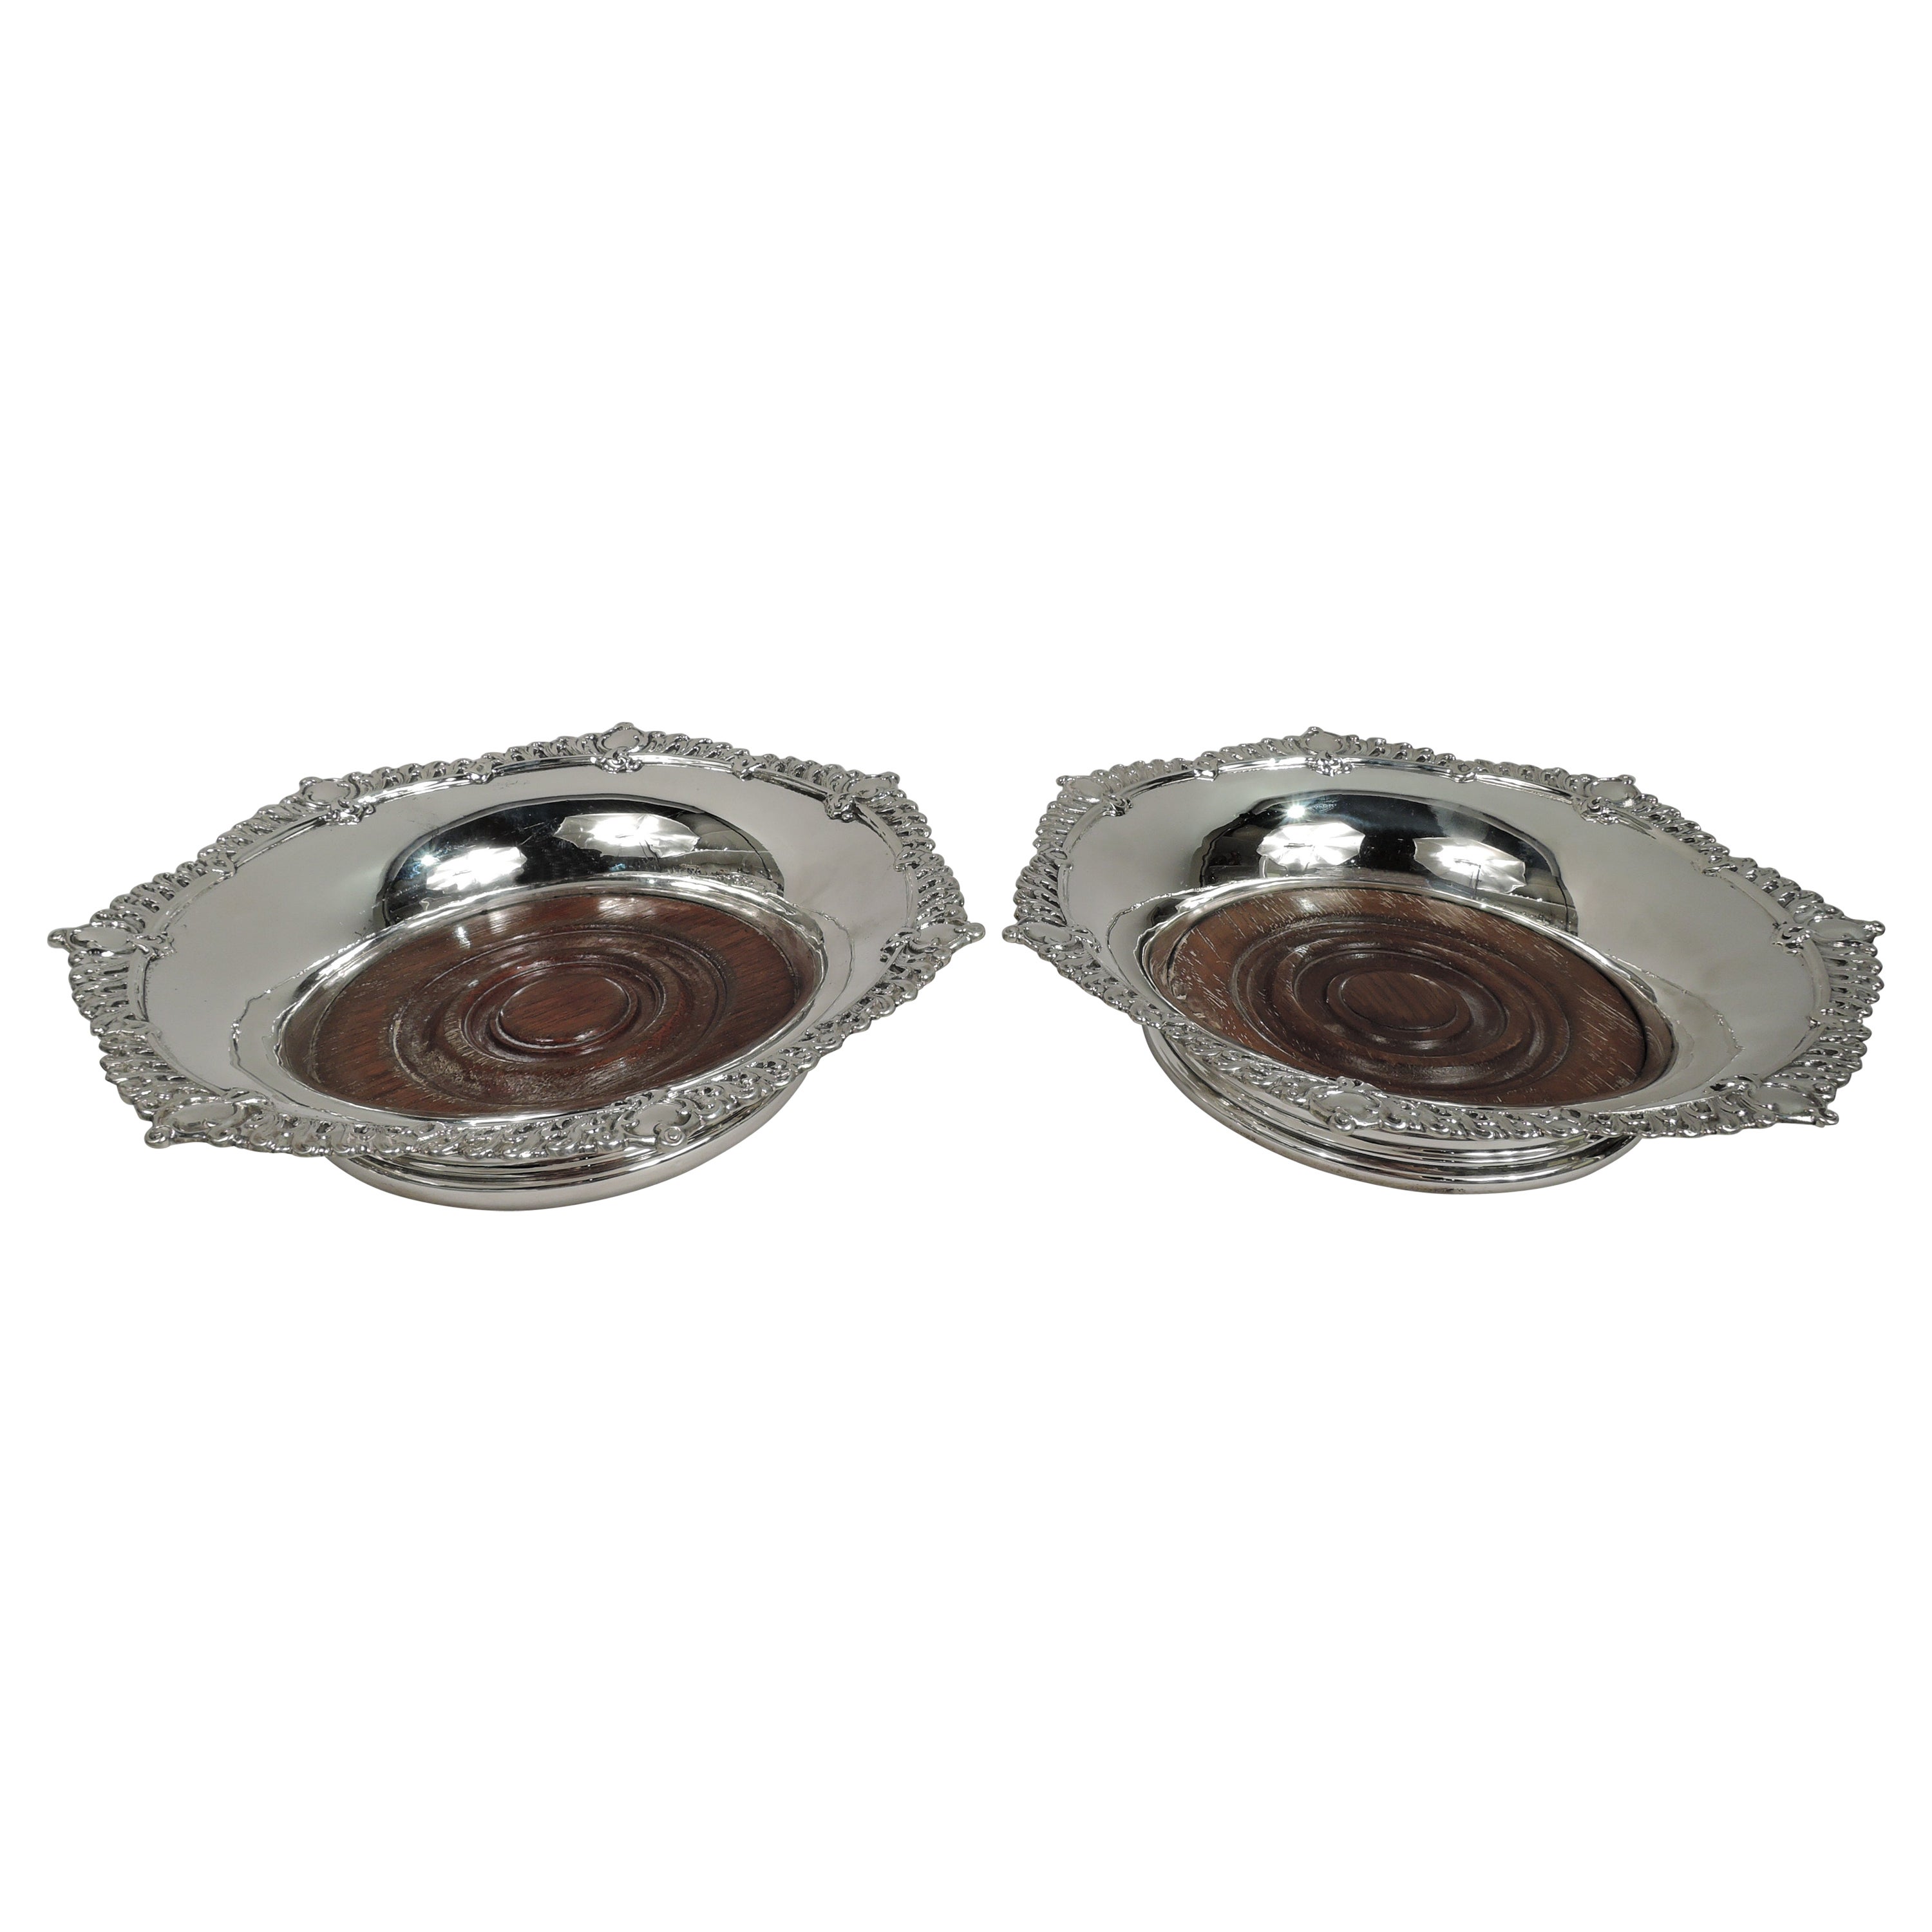 Gift-Quality American Edwardian Sterling Silver Wine Bottle Coasters